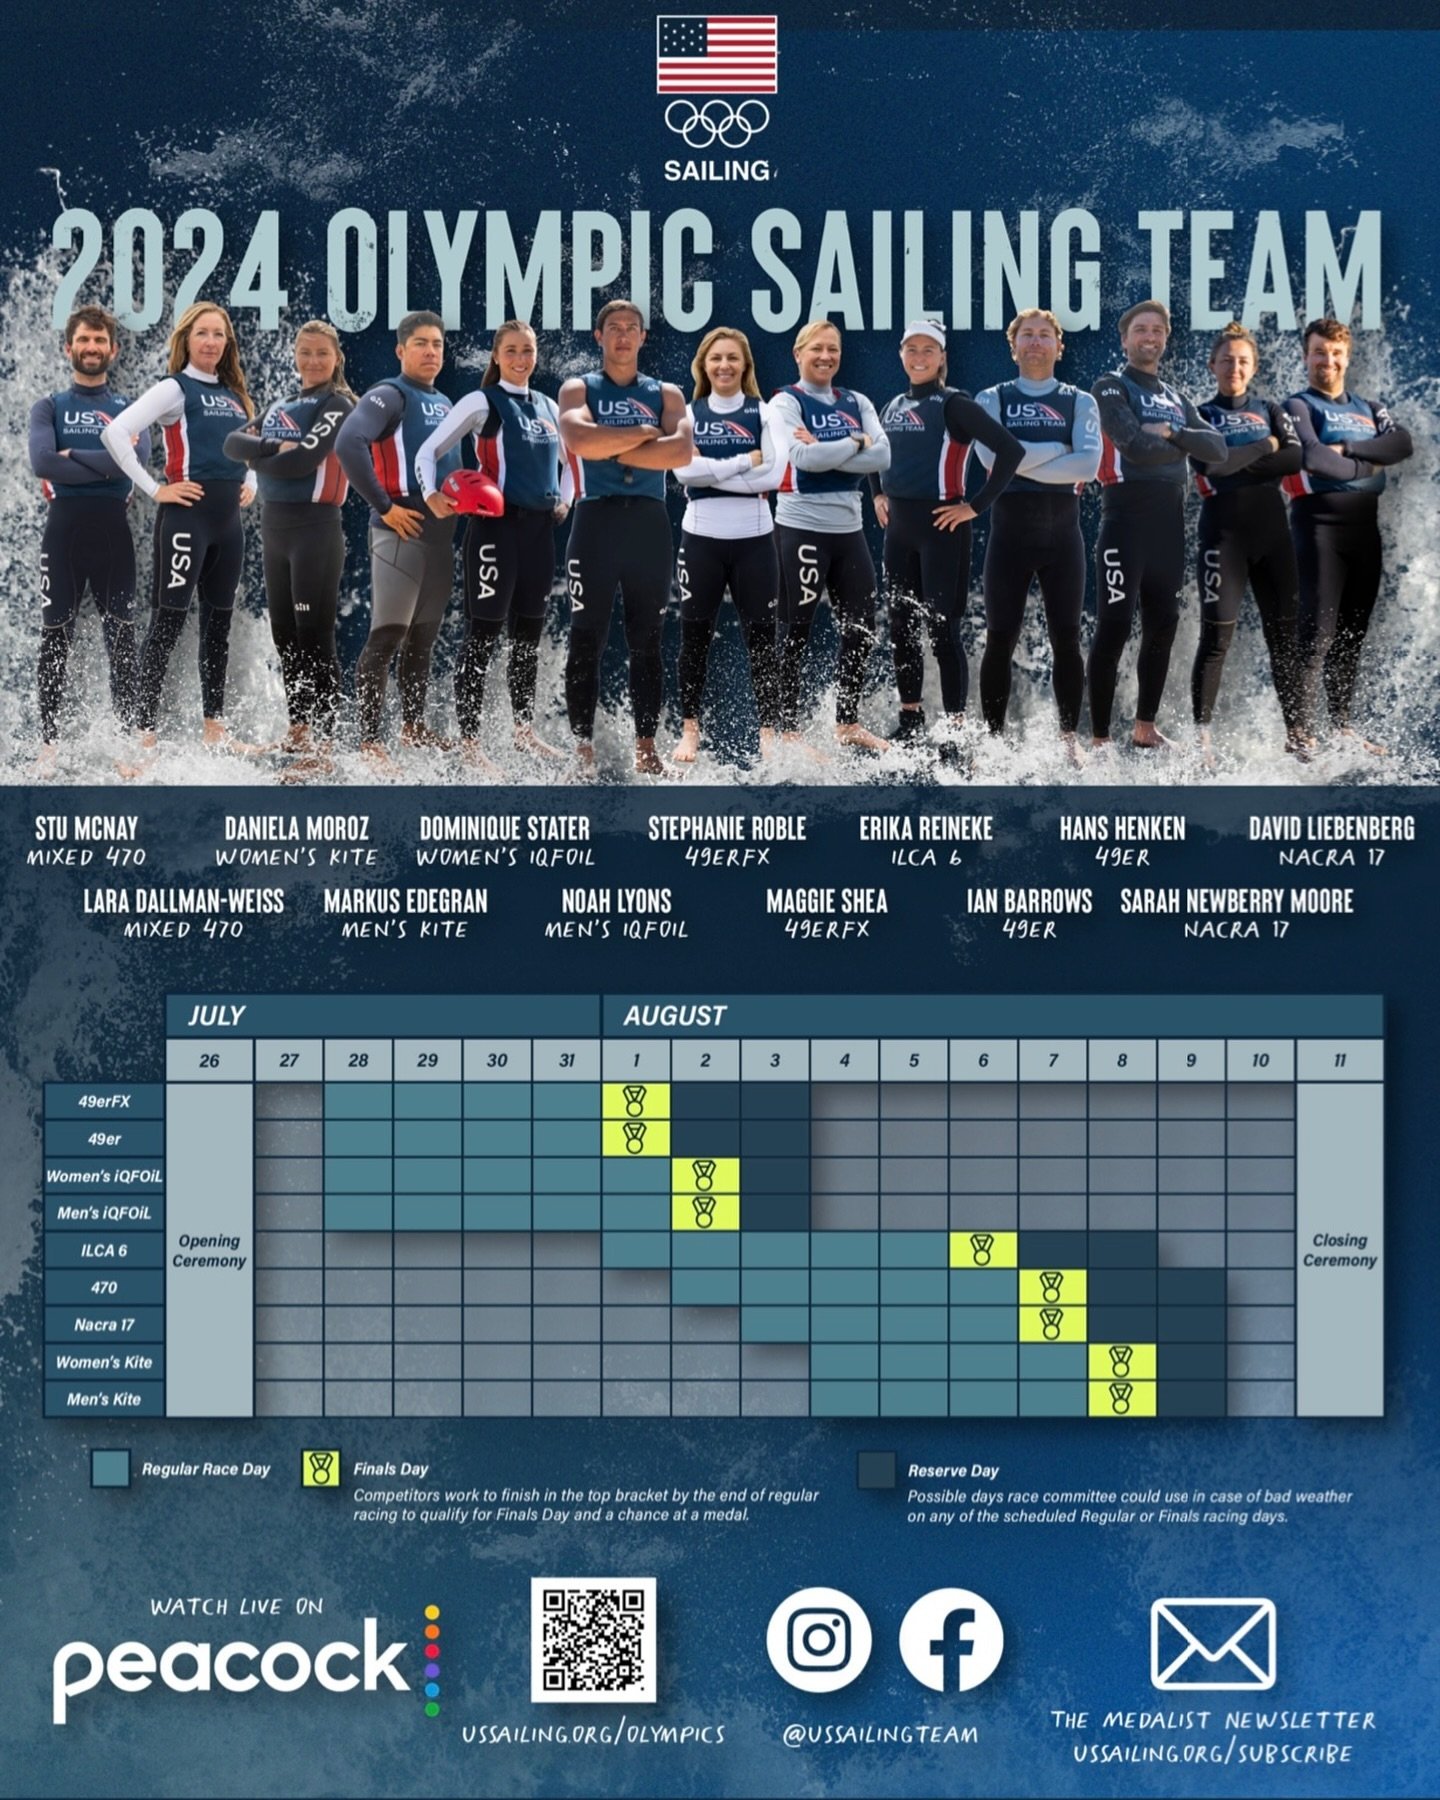 Paris Summer Olympic Games countdown is at 69 days before July 26, 2024. The 🇺🇸 Olympic Sailing Team is locked in ready for Paris. Are you? 

Poster created by @al.chenard.

#paris 
#parisolympics2024 
#sailing
#sailingclass
#usa
#teamusa